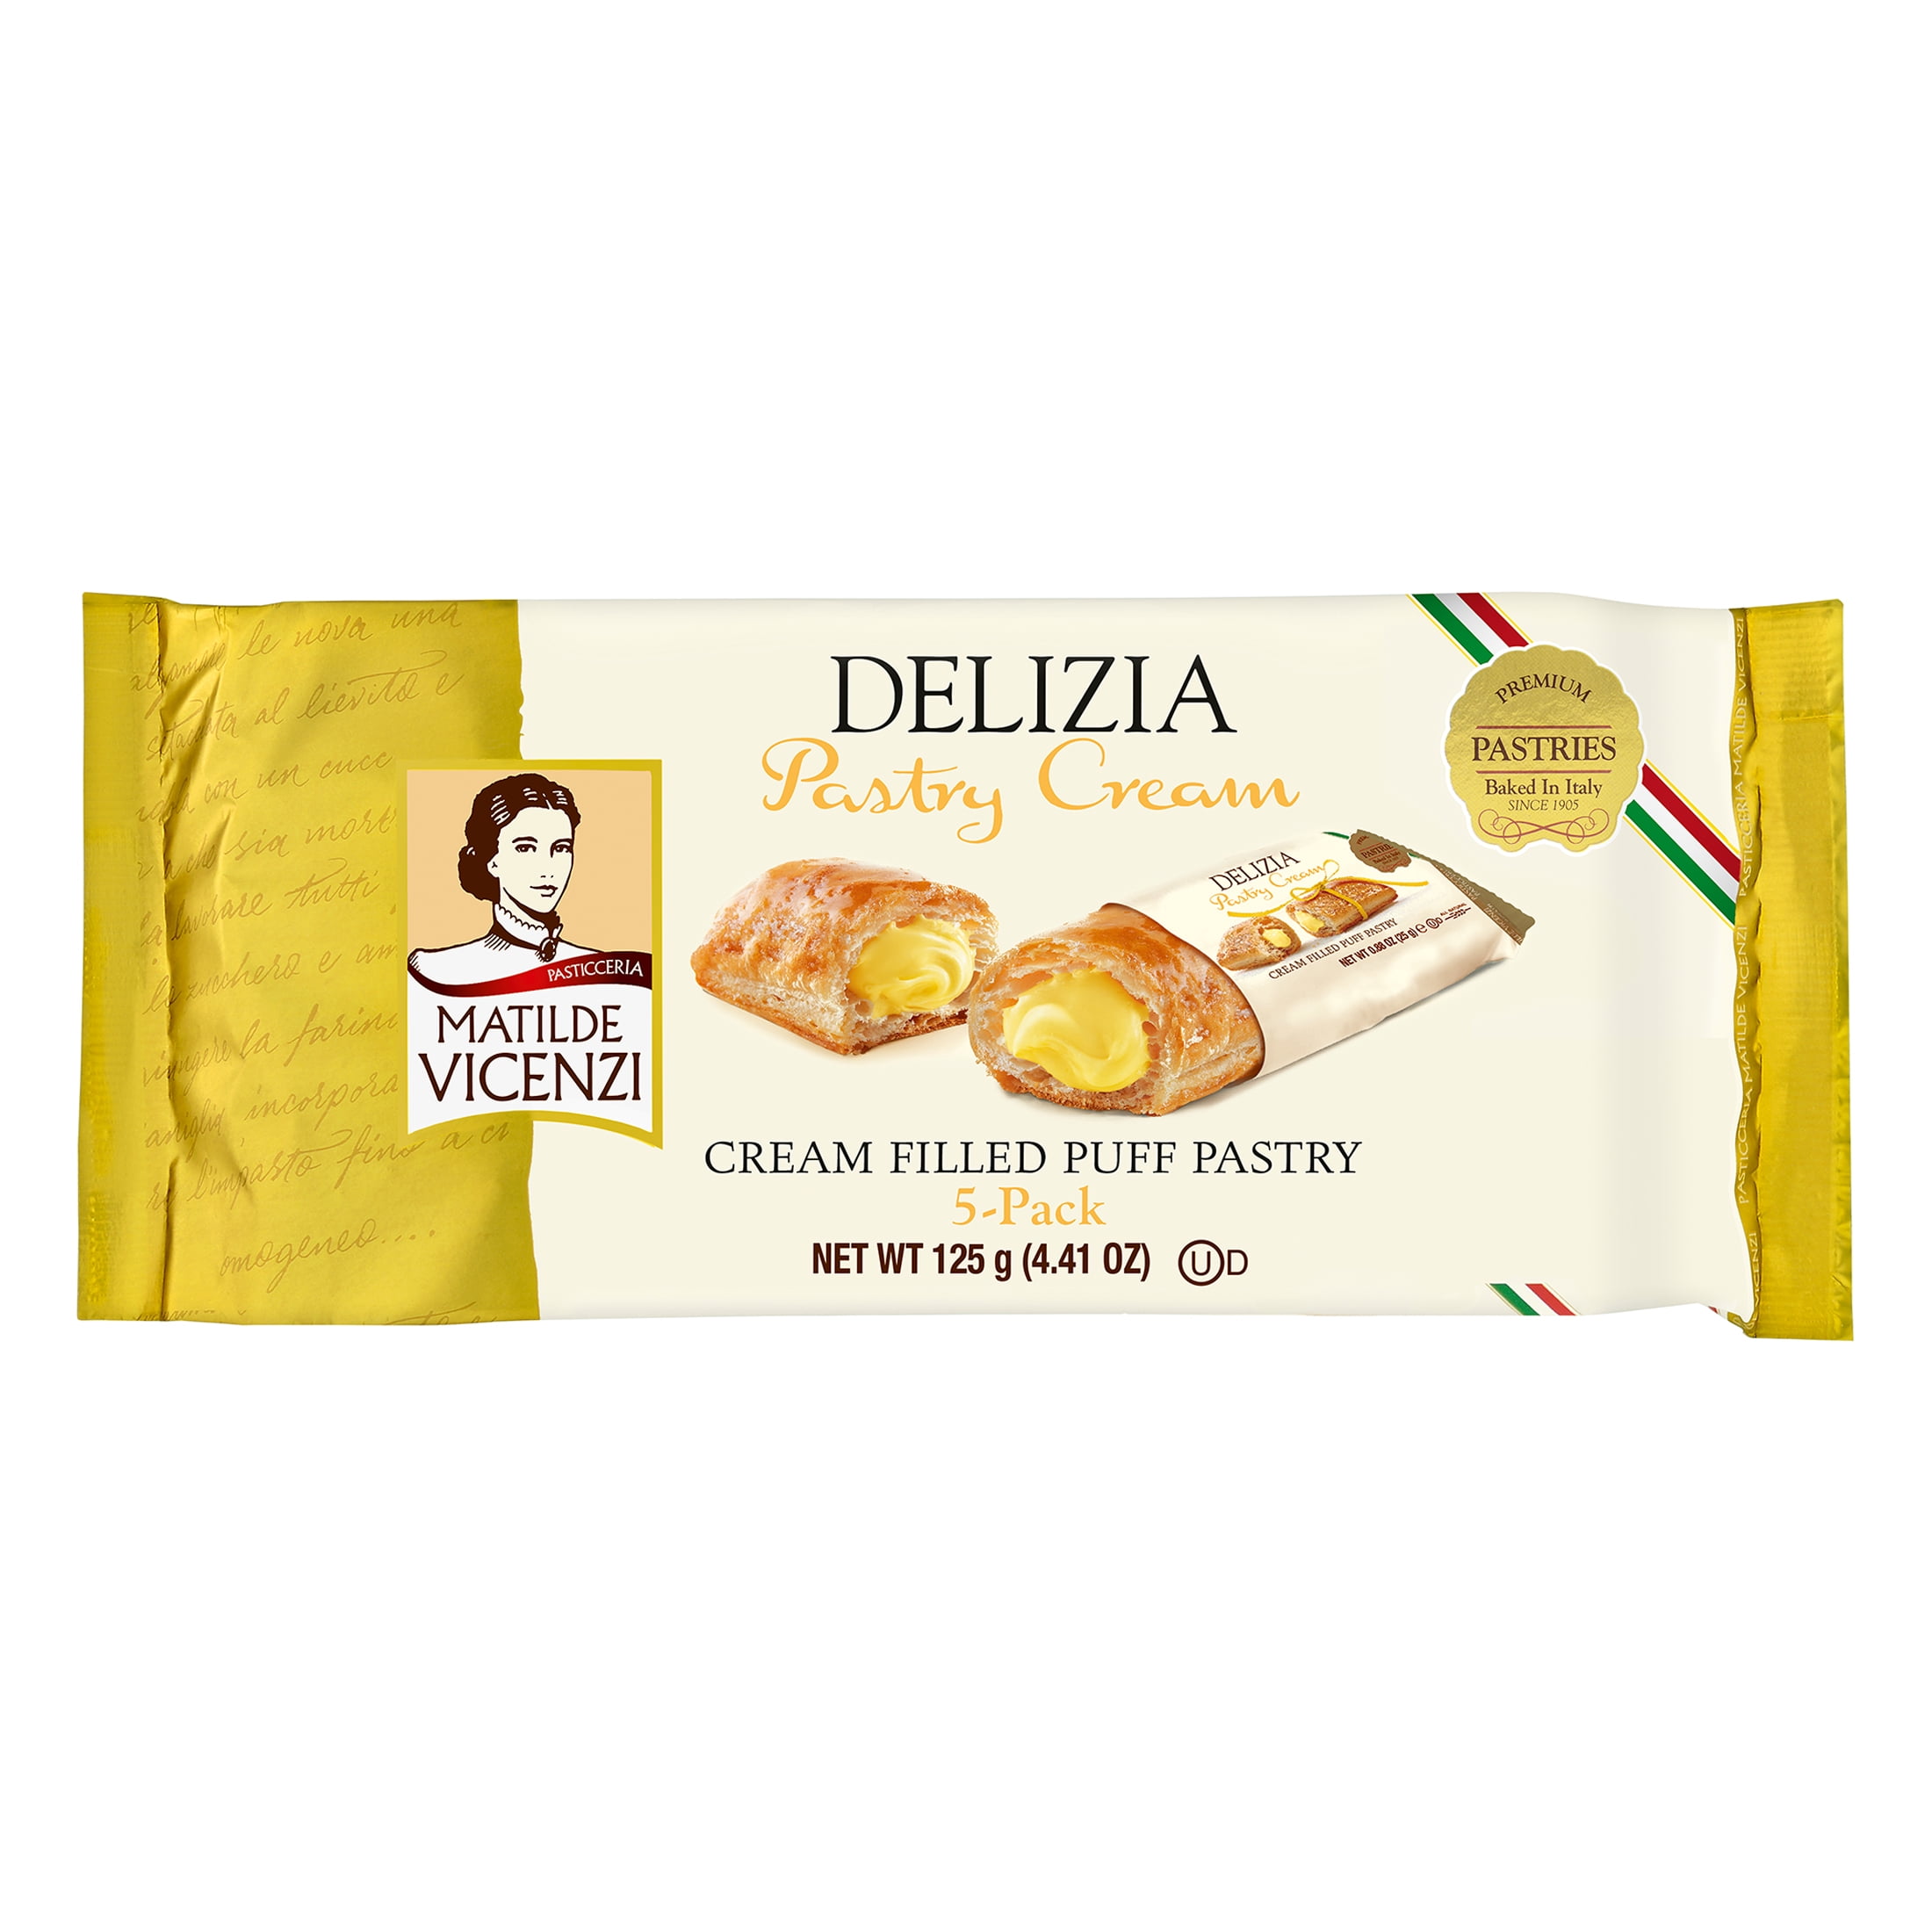 Pastry Cream Filled Puff Pastry Delizia by Vicenzi - 4.41 oz